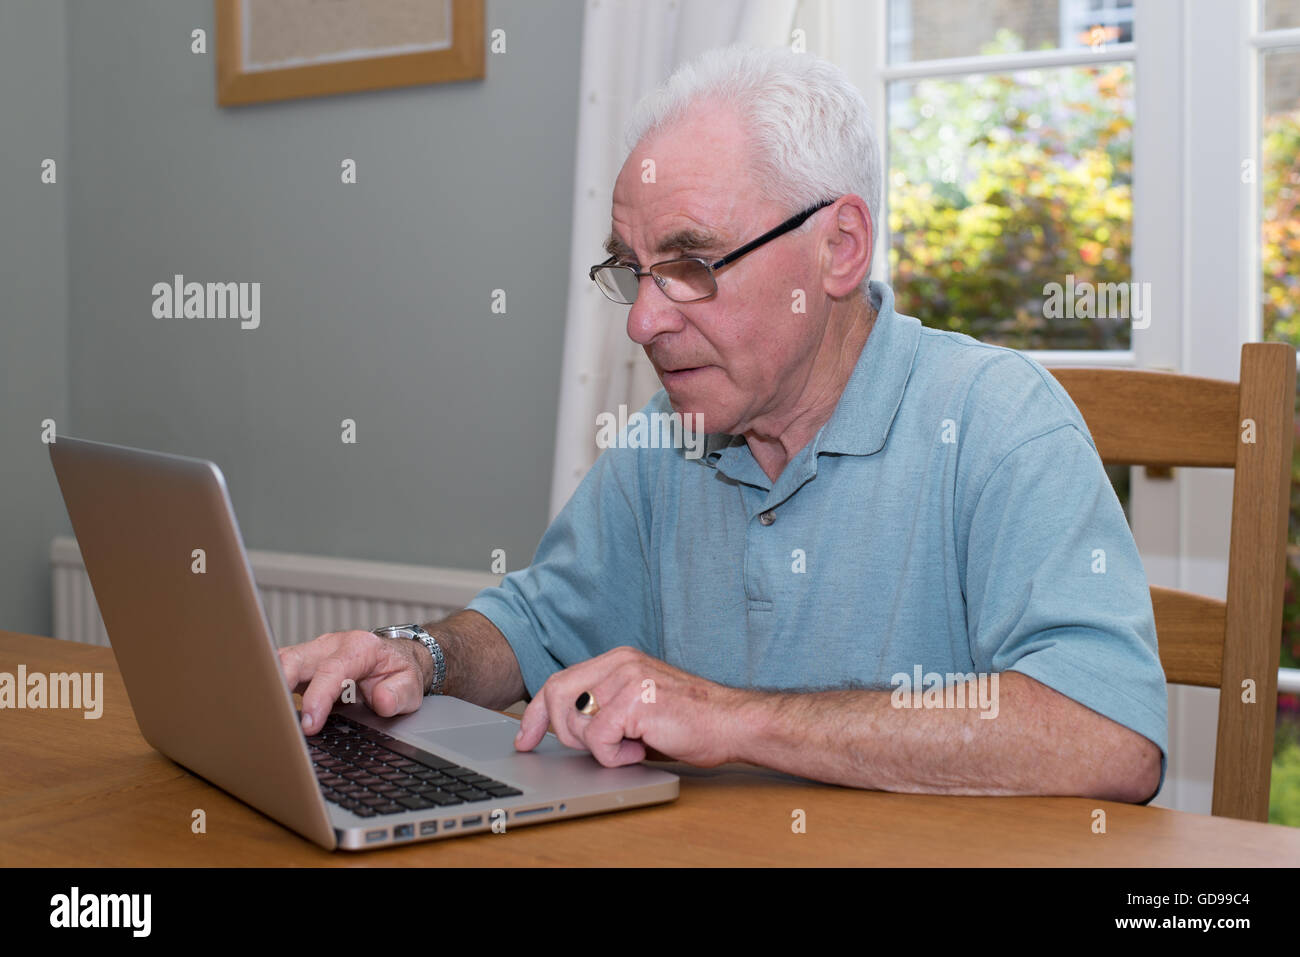 Old man sat down at a table using a laptop computer Stock Photo